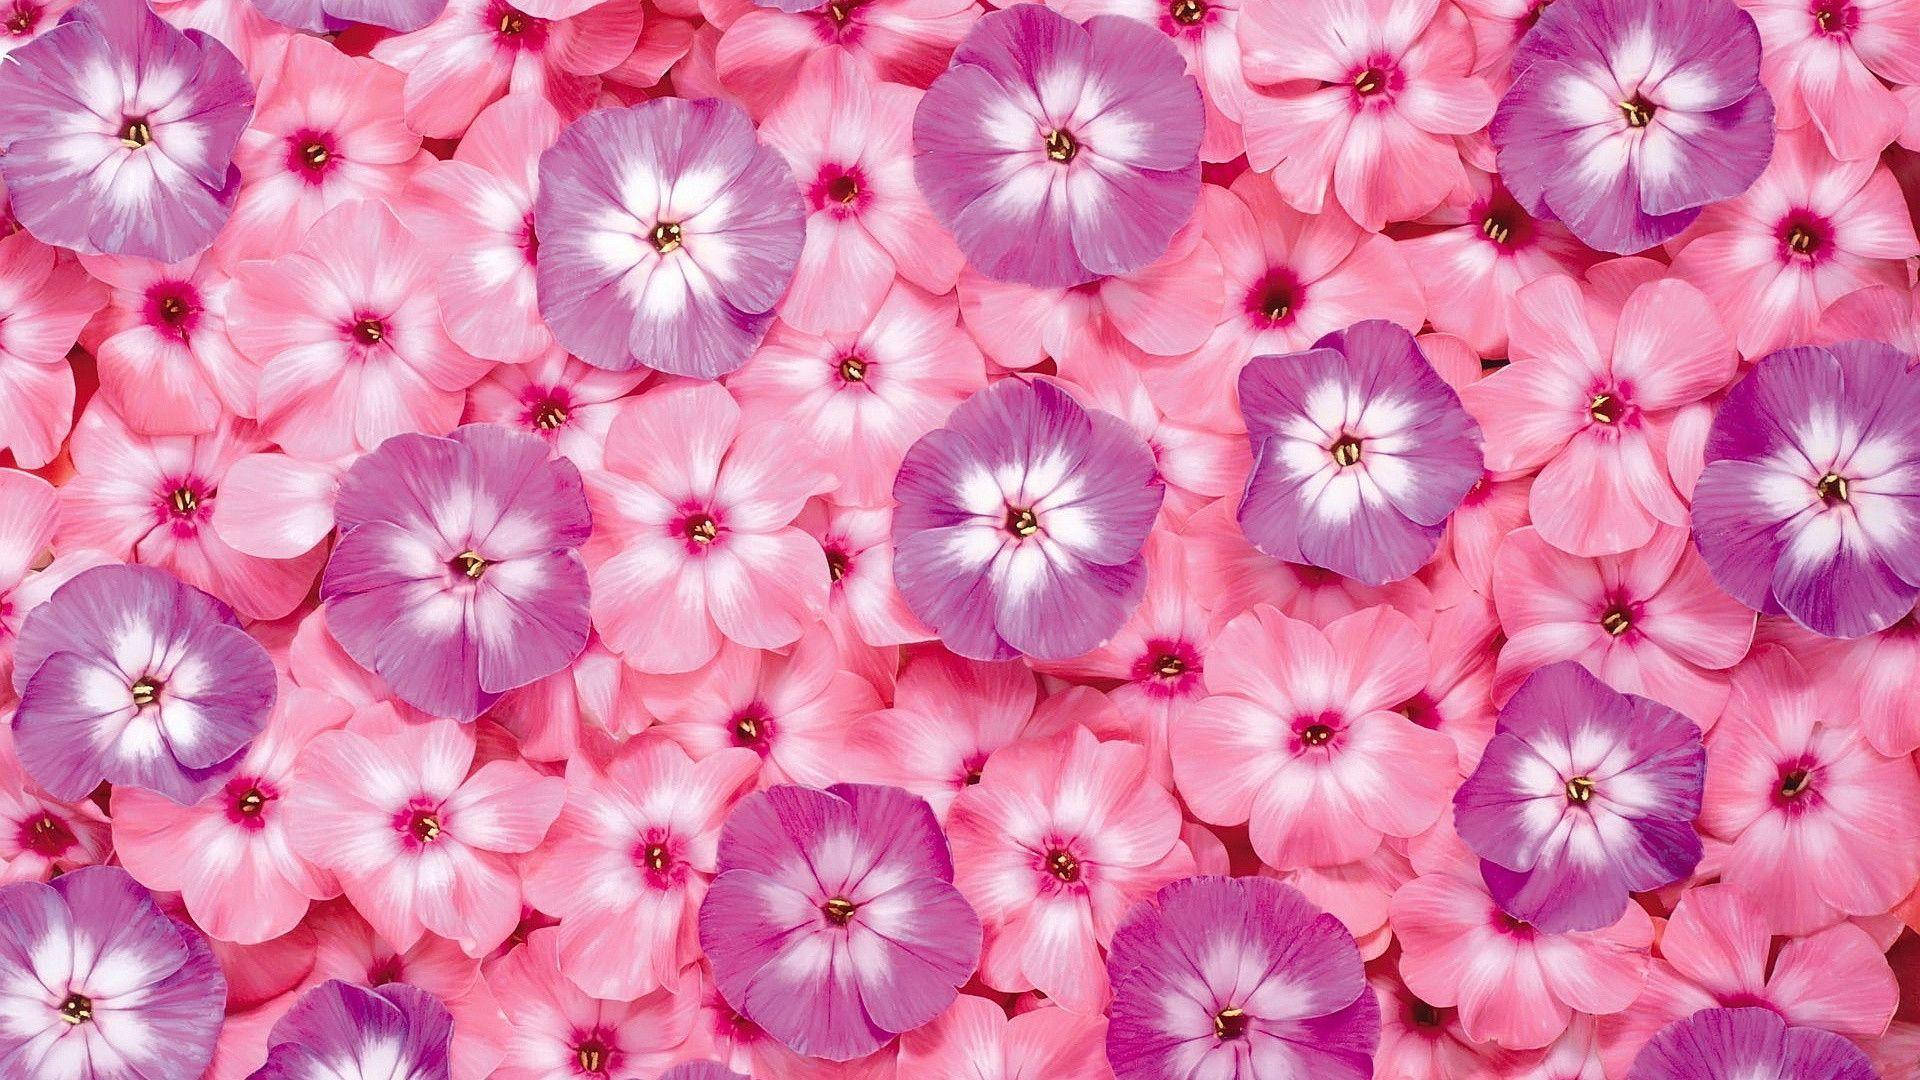 Crowded Tiny Pink Flowers Wallpaper